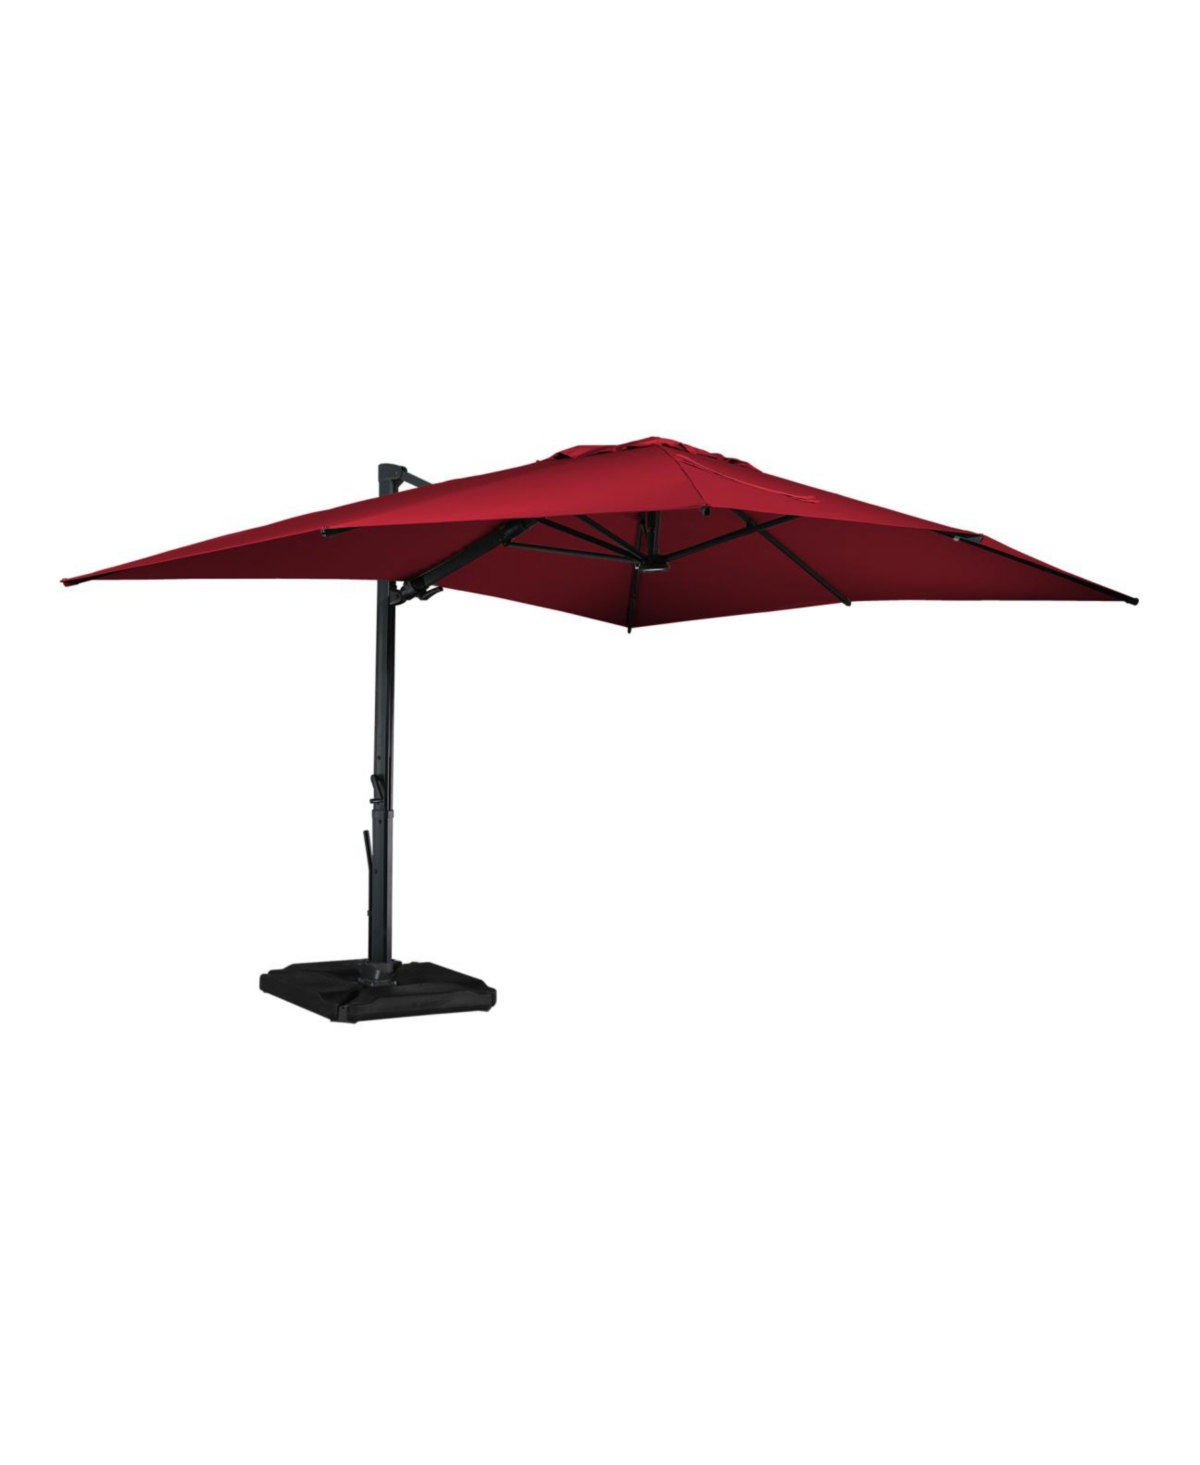 13ft Square Solar Led Offset Cantilever Patio Umbrella for Outdoor Shade - Gray